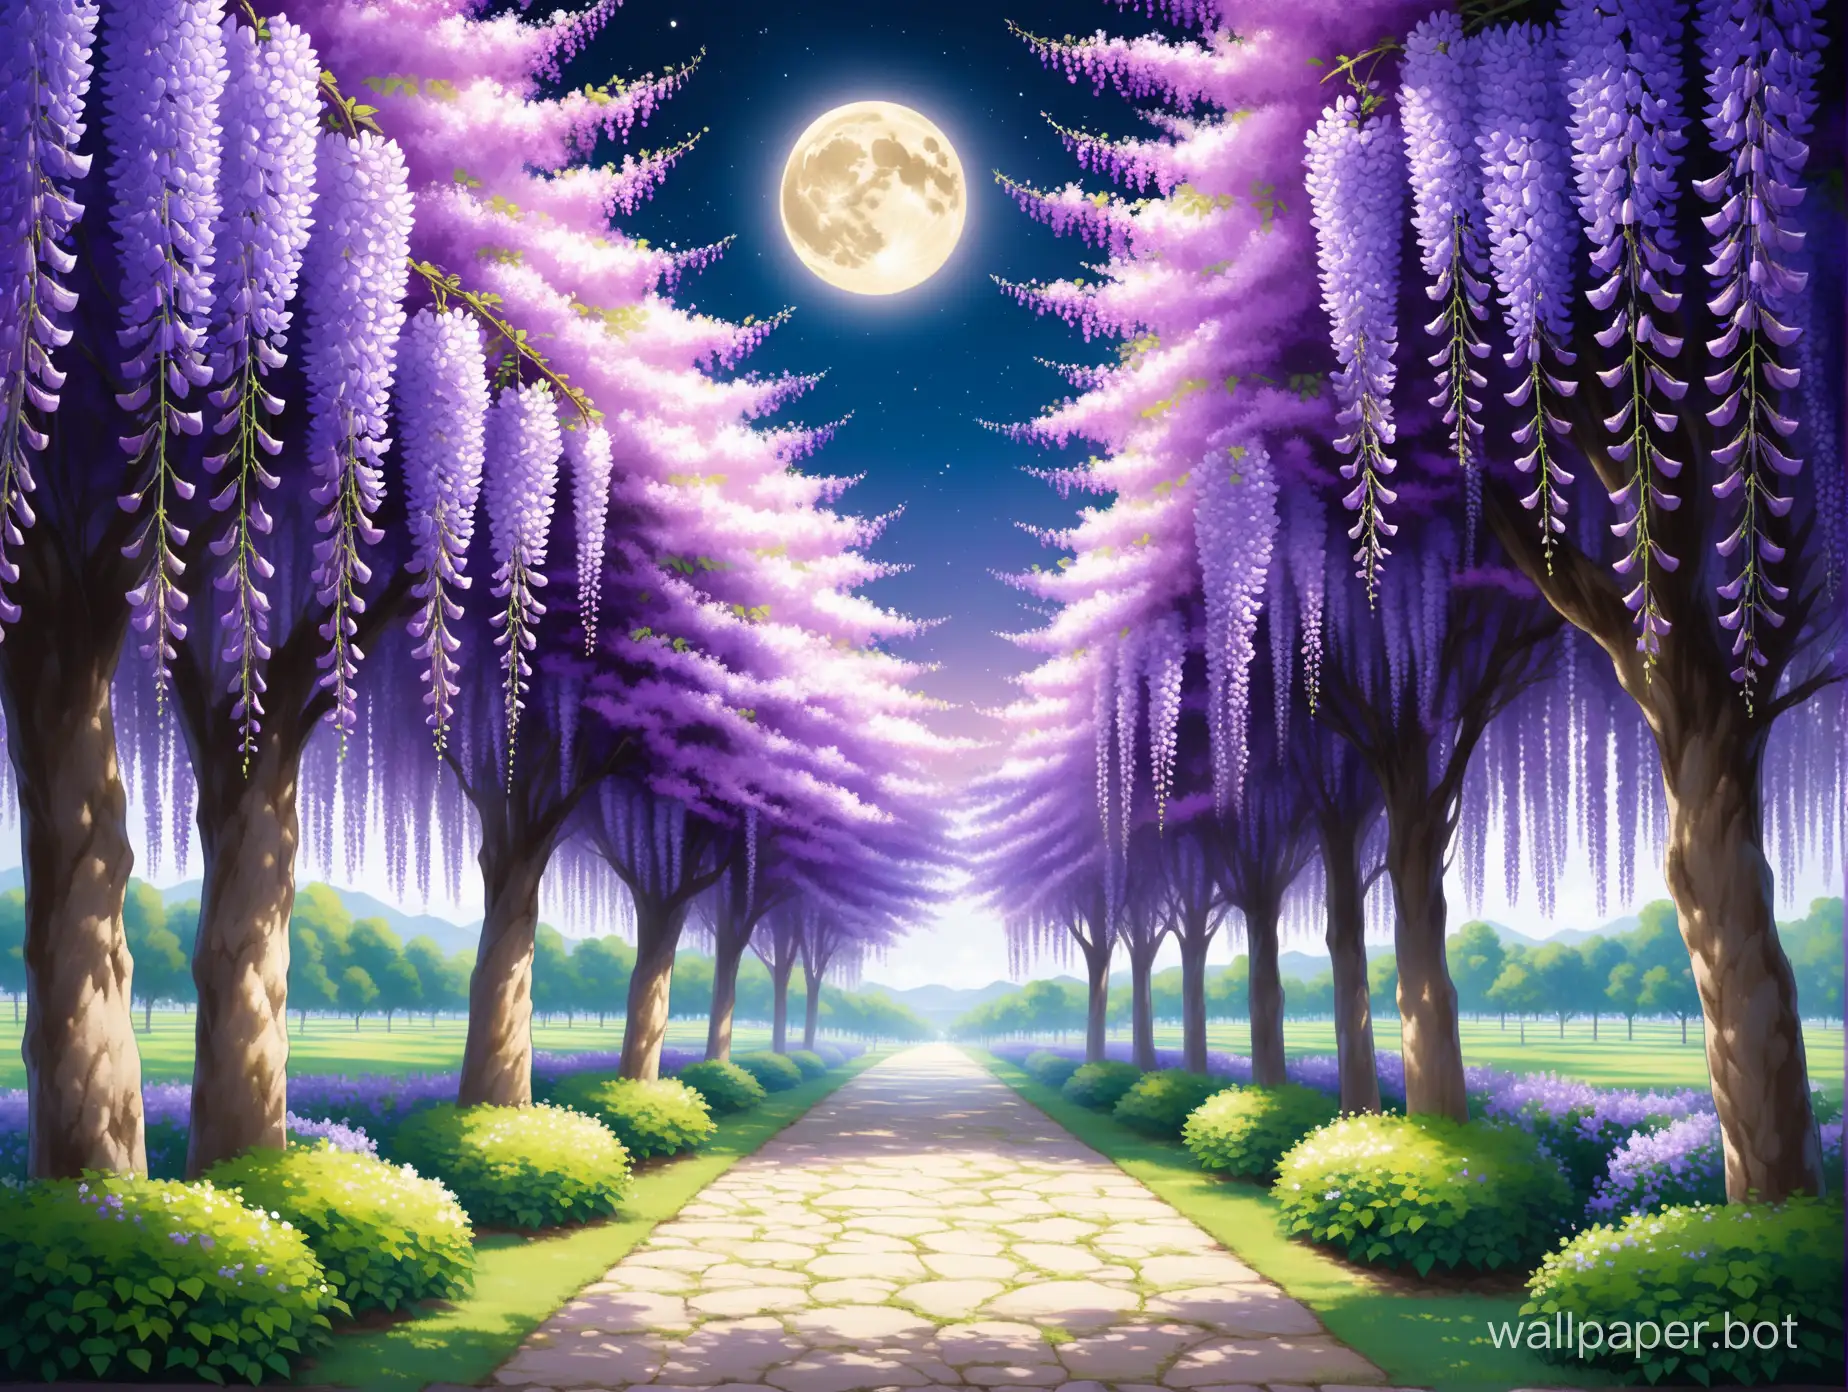 pastel purple wisteria flower trees lining a stone path leads to show the moon